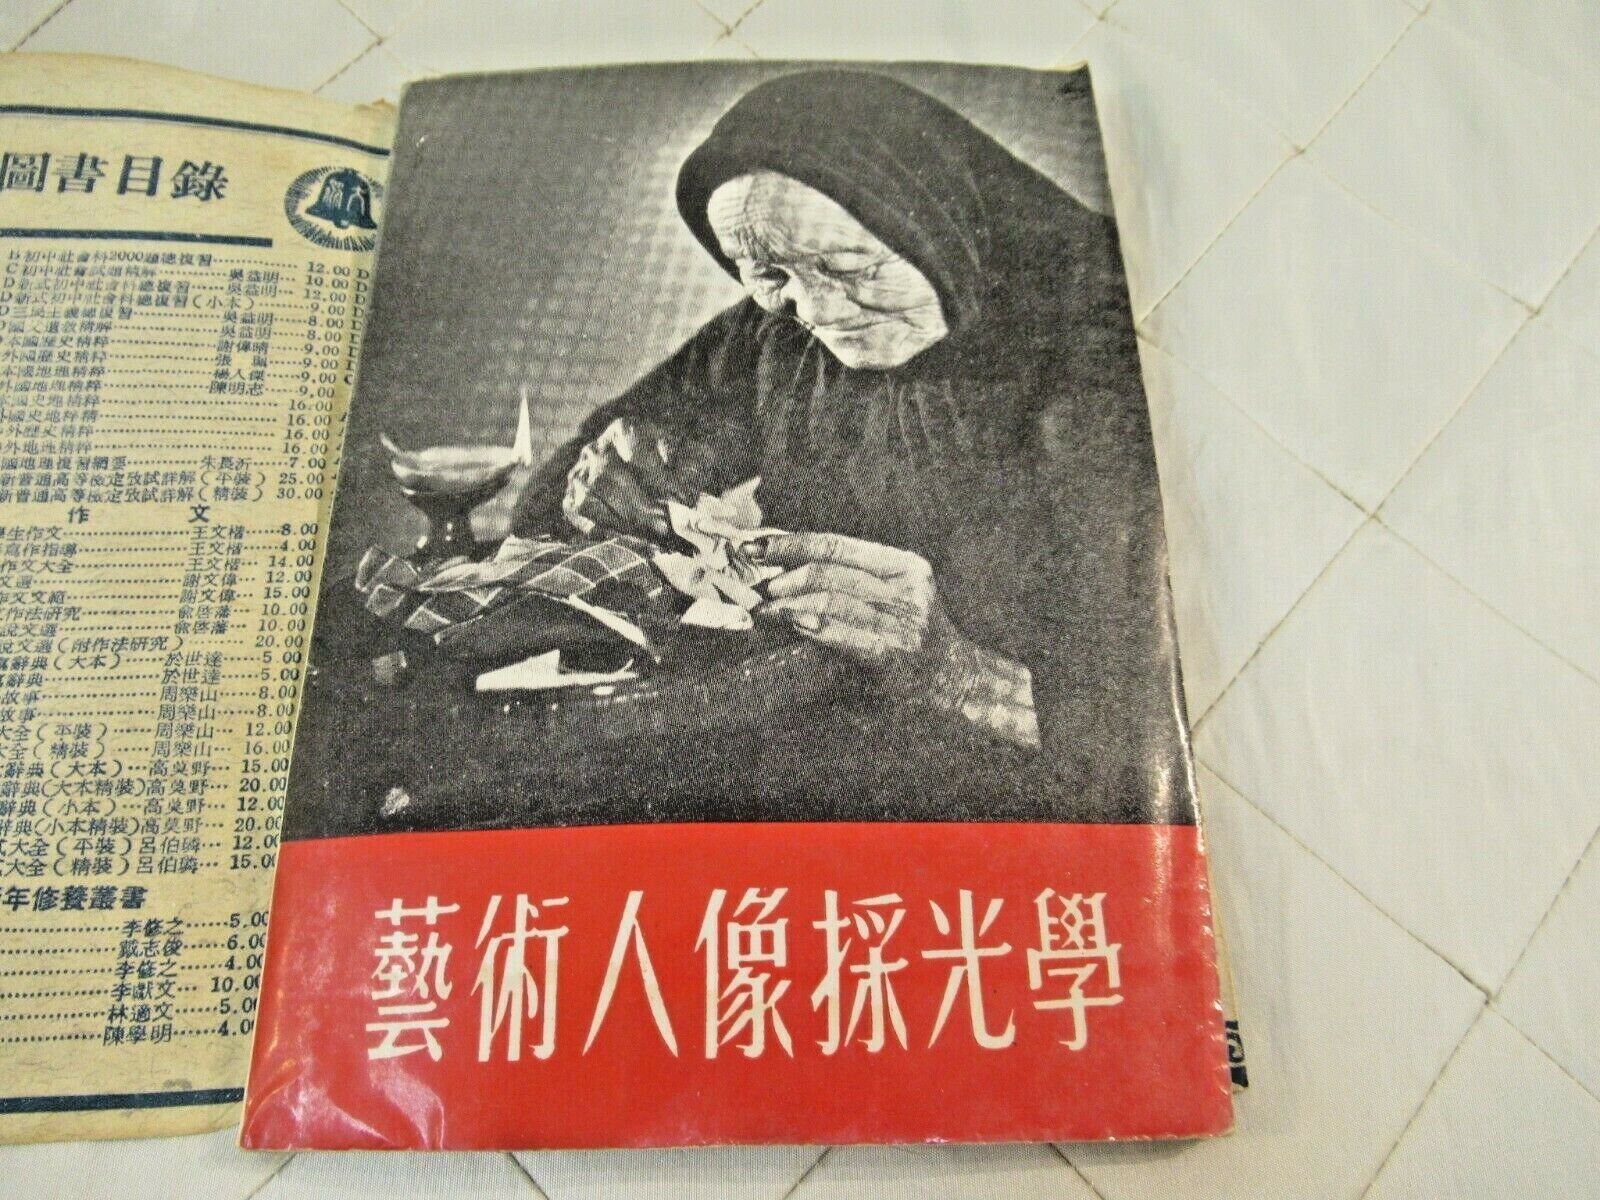 Primary image for Art Portraits Optics Photography Guide VTG by Mo Tianzhong 藝術人像採光學 Chinese Book